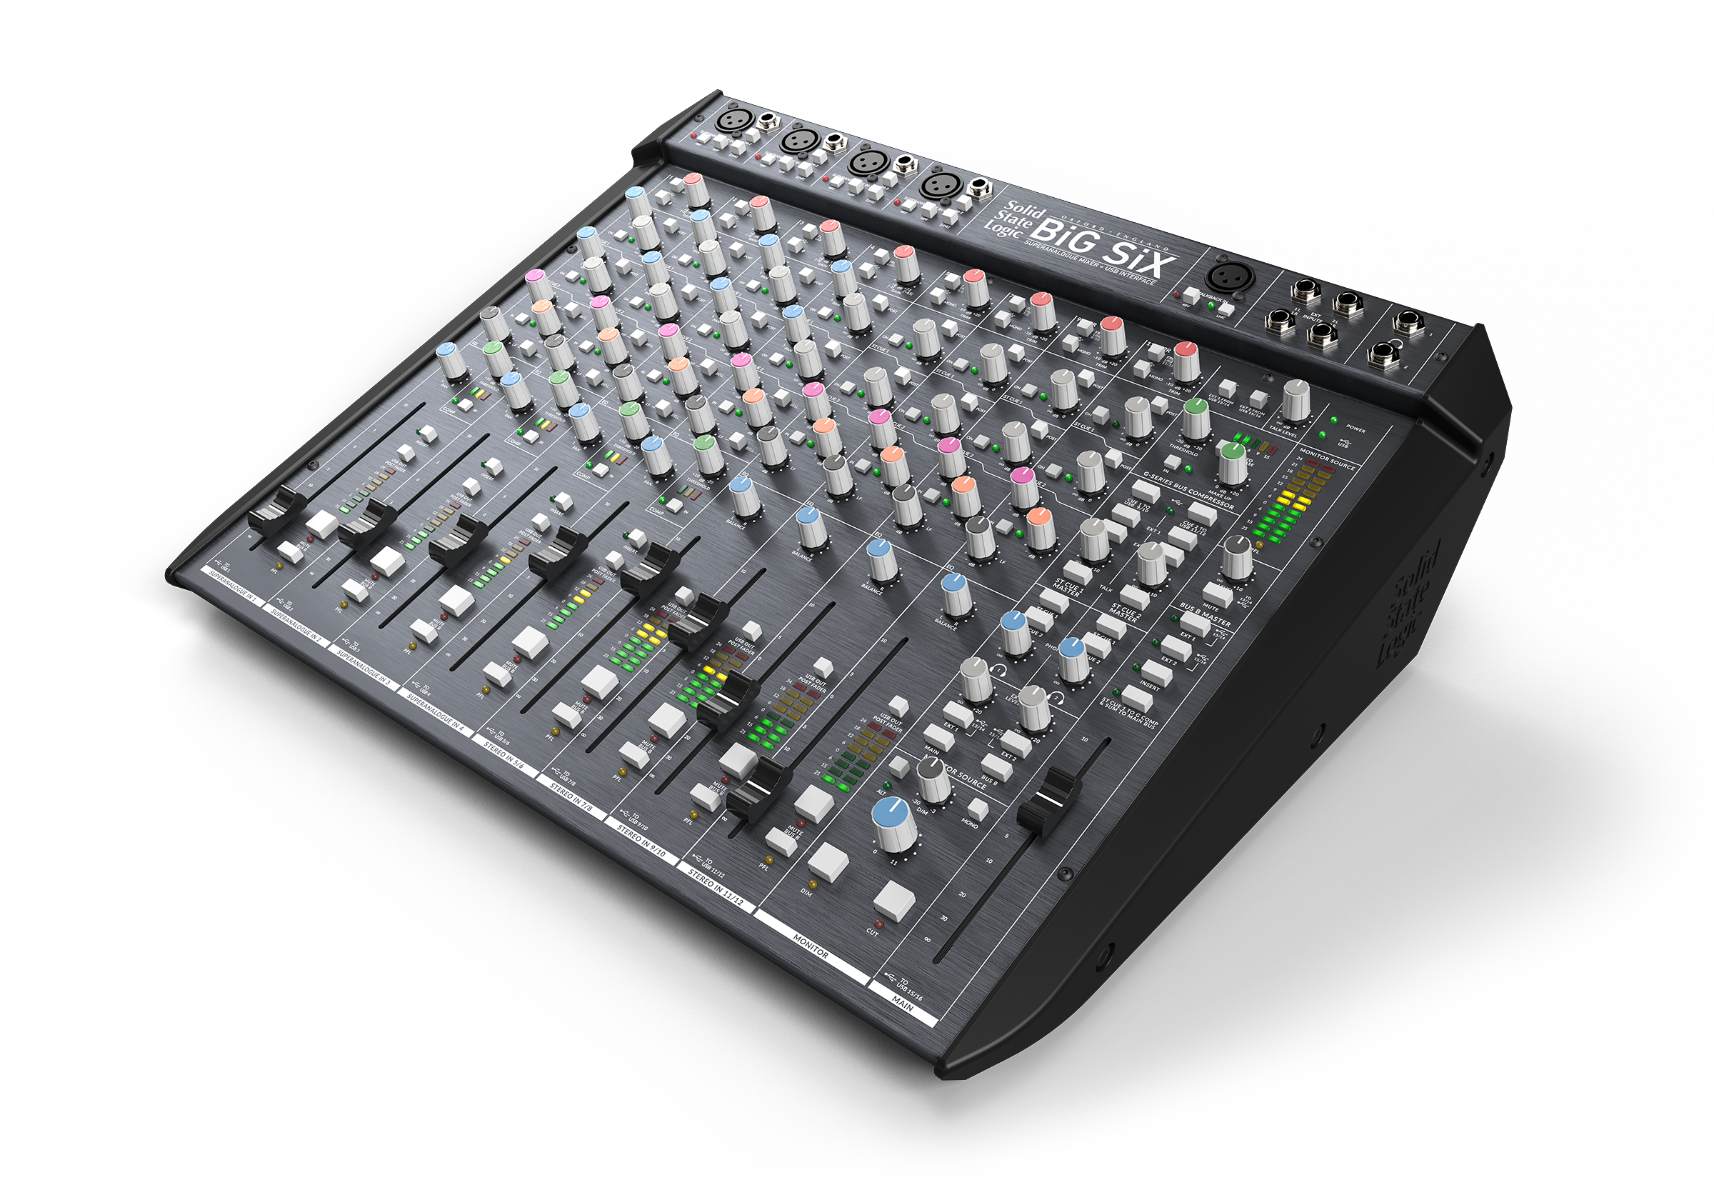 Solid State Logic BiG SiX - Analog Recording Mixer and Interface